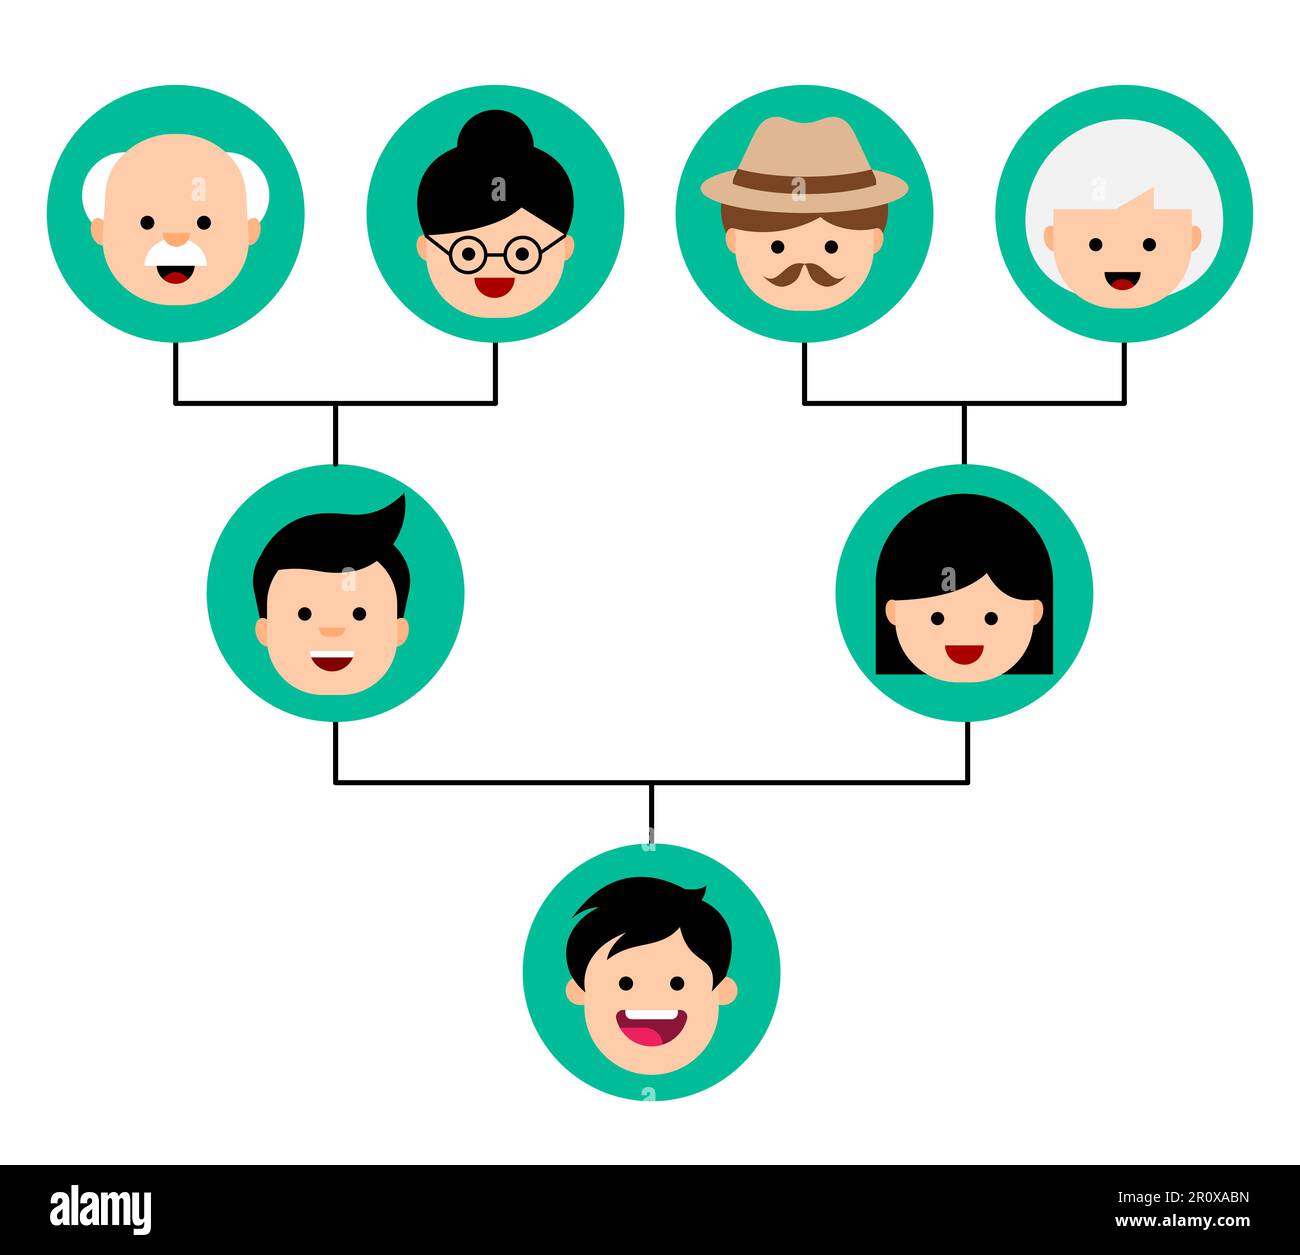 Genealogy Treasure Chest Family Tree Charts To Fill In | 3-Pack | 11x17  Double Sided Paper Family Tree Poster | Genealogy Charts and Forms |  Genealogy